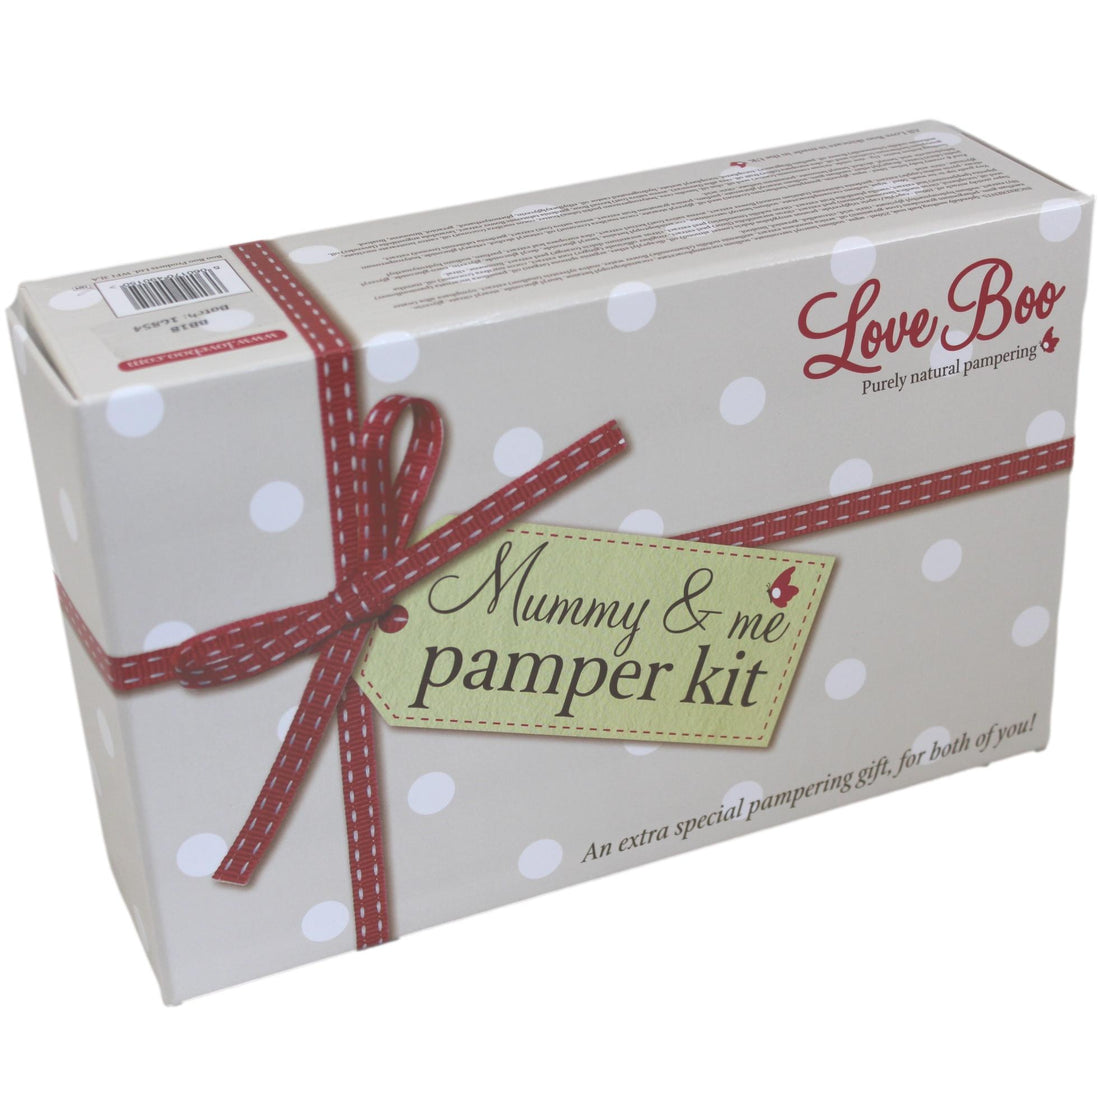 Love Boo Mummy and Me Pamper Kit